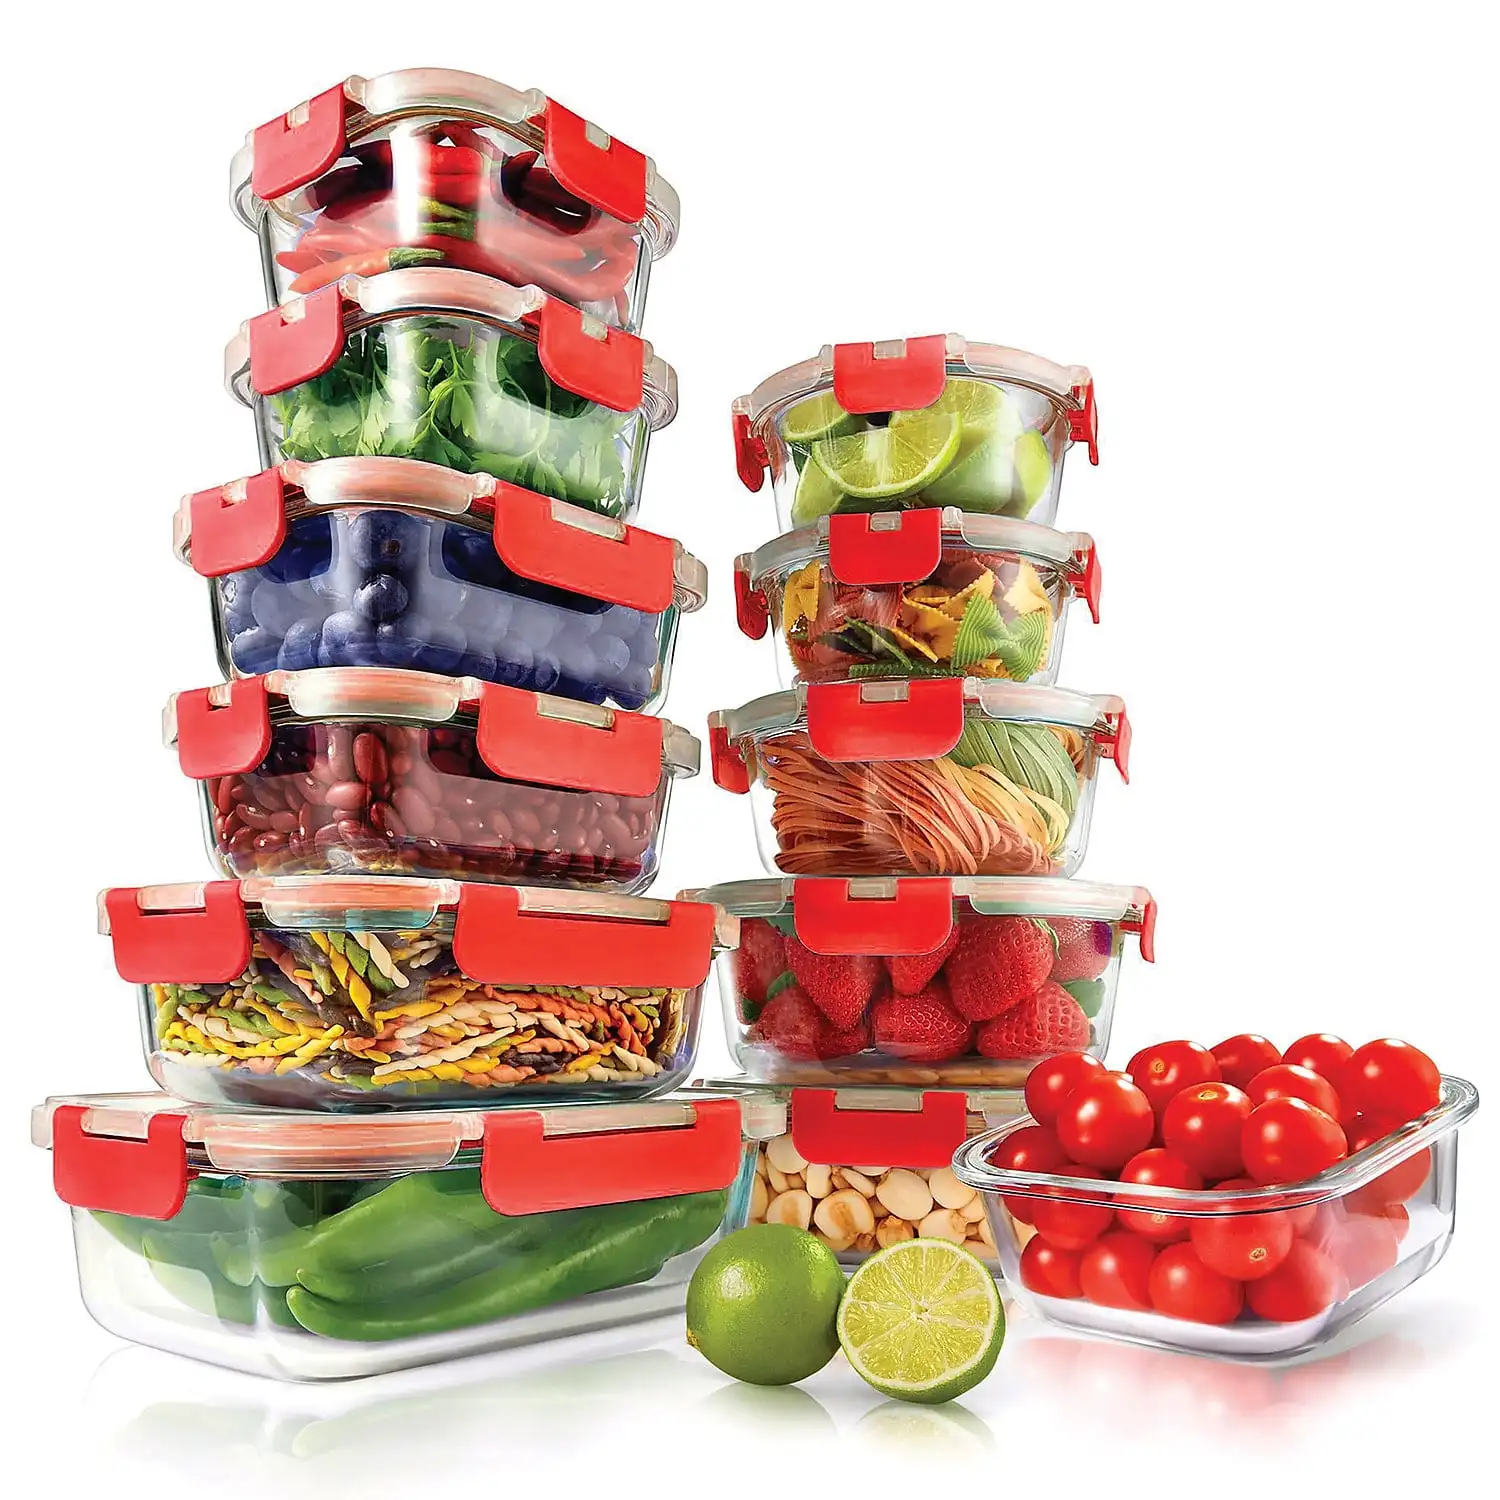 

24-Piece Glass Food Storage Set with Locking Hinge Red Lids - Superior Quality